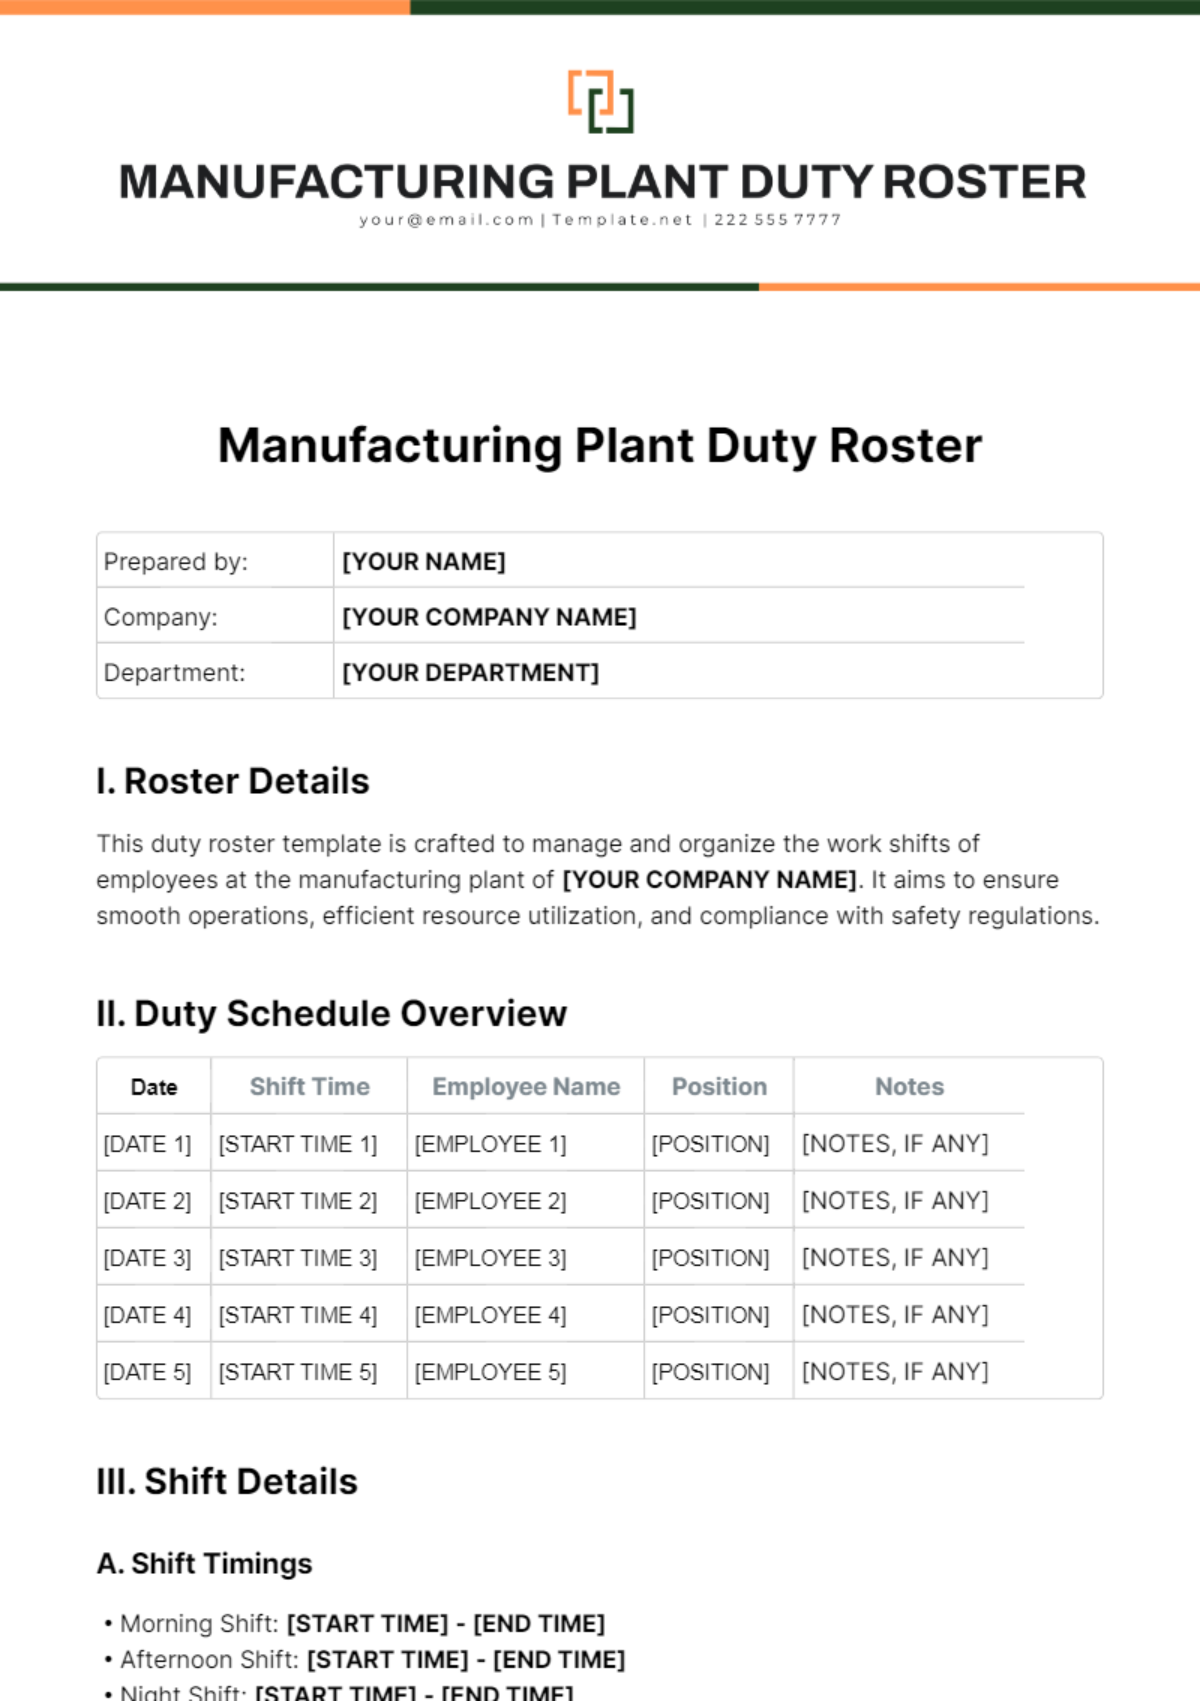 Free Manufacturing Plant Duty Roster Template